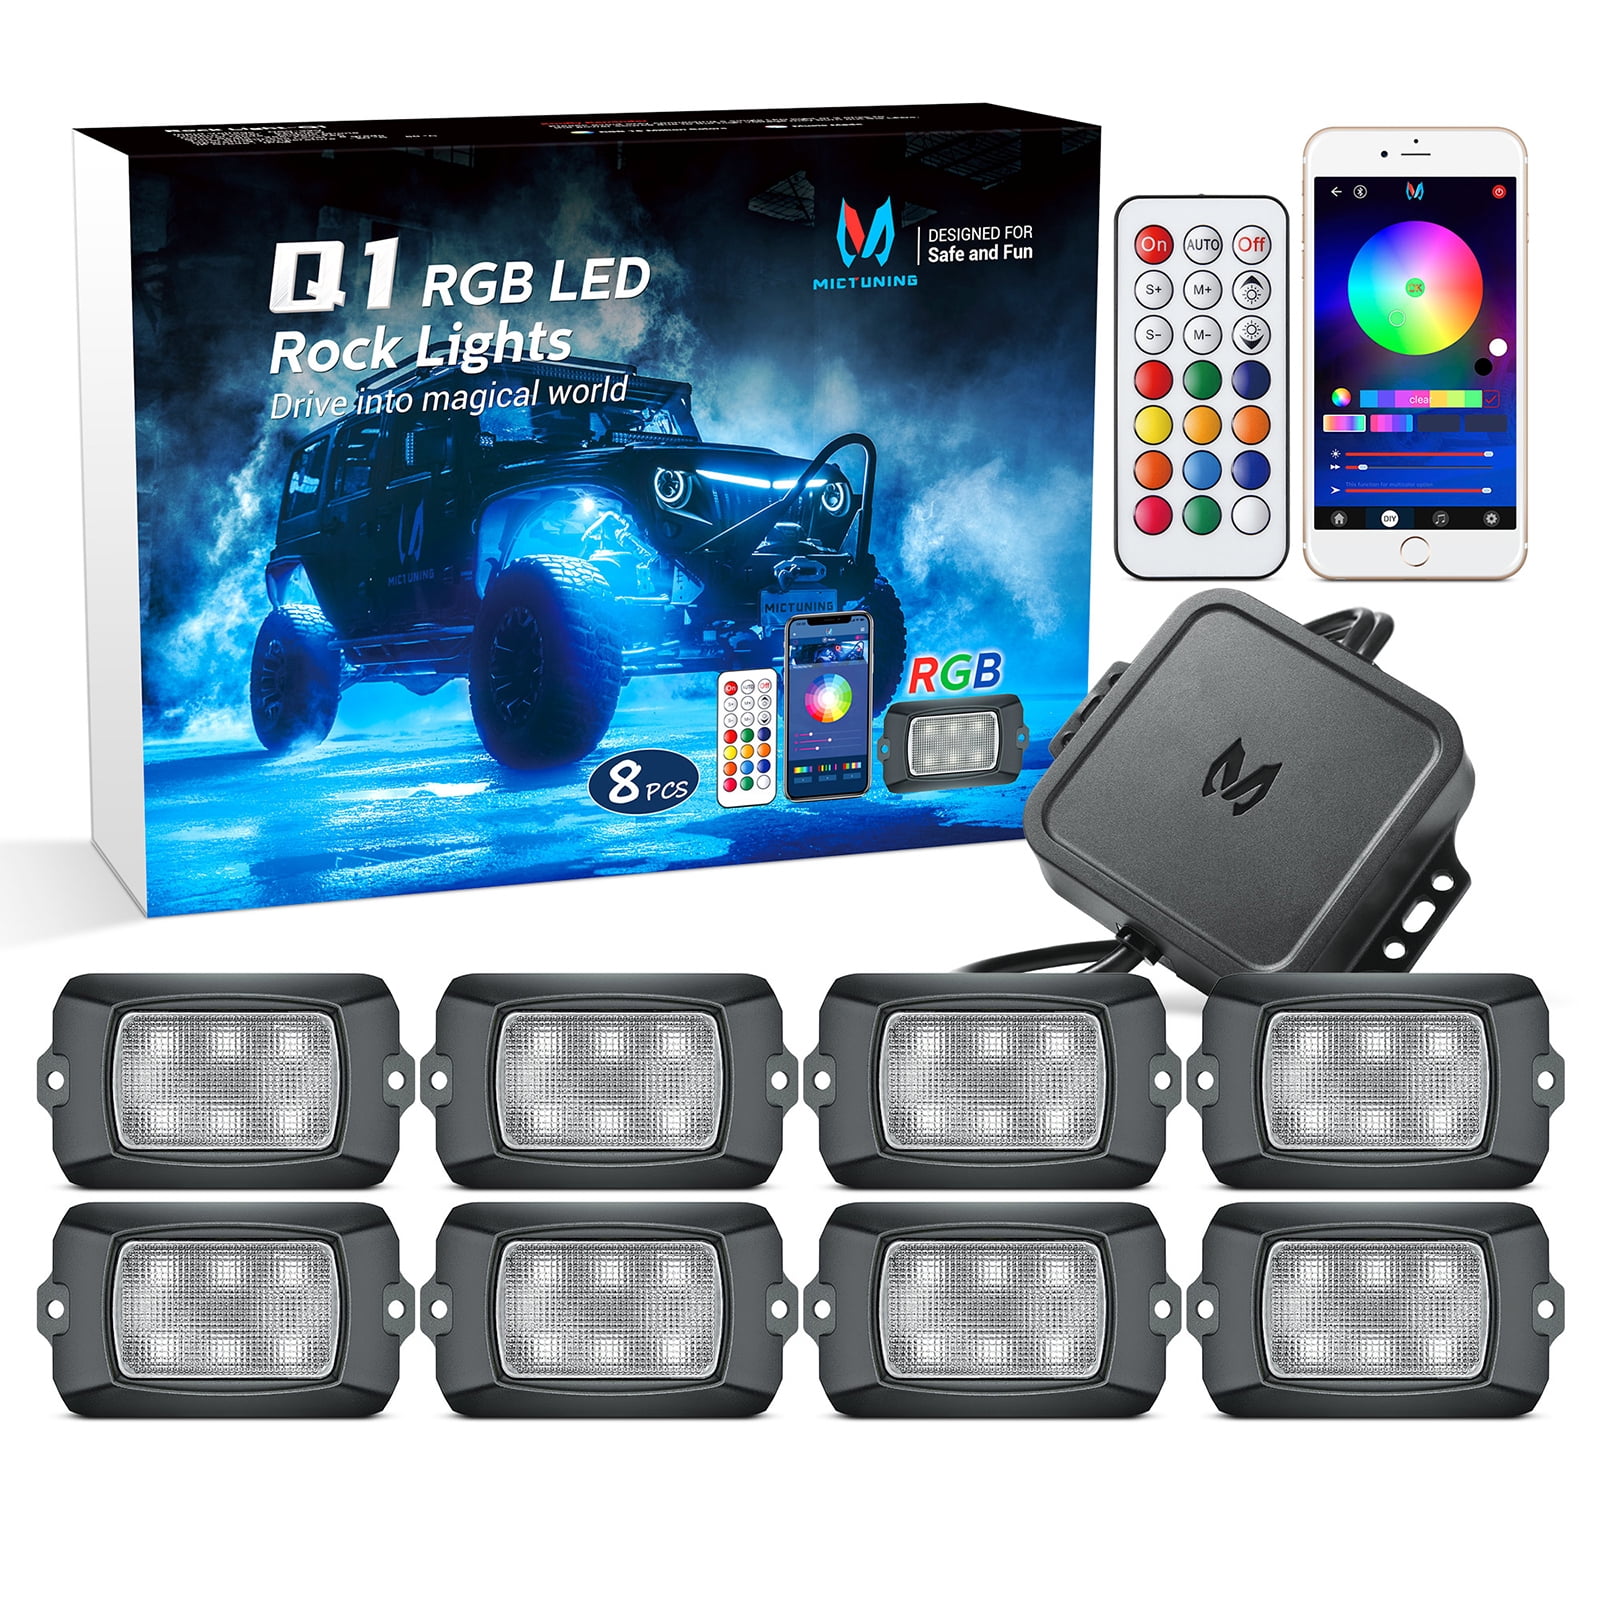 8pods Neon Lights RGB LED Rock Lights Kits Multi-Color Cell Phone Control Bluetooth Controller Waterproof Cars Truck SUV Replacement fit for Jeep Vehicle Boat Interior with Timing Music Mode 